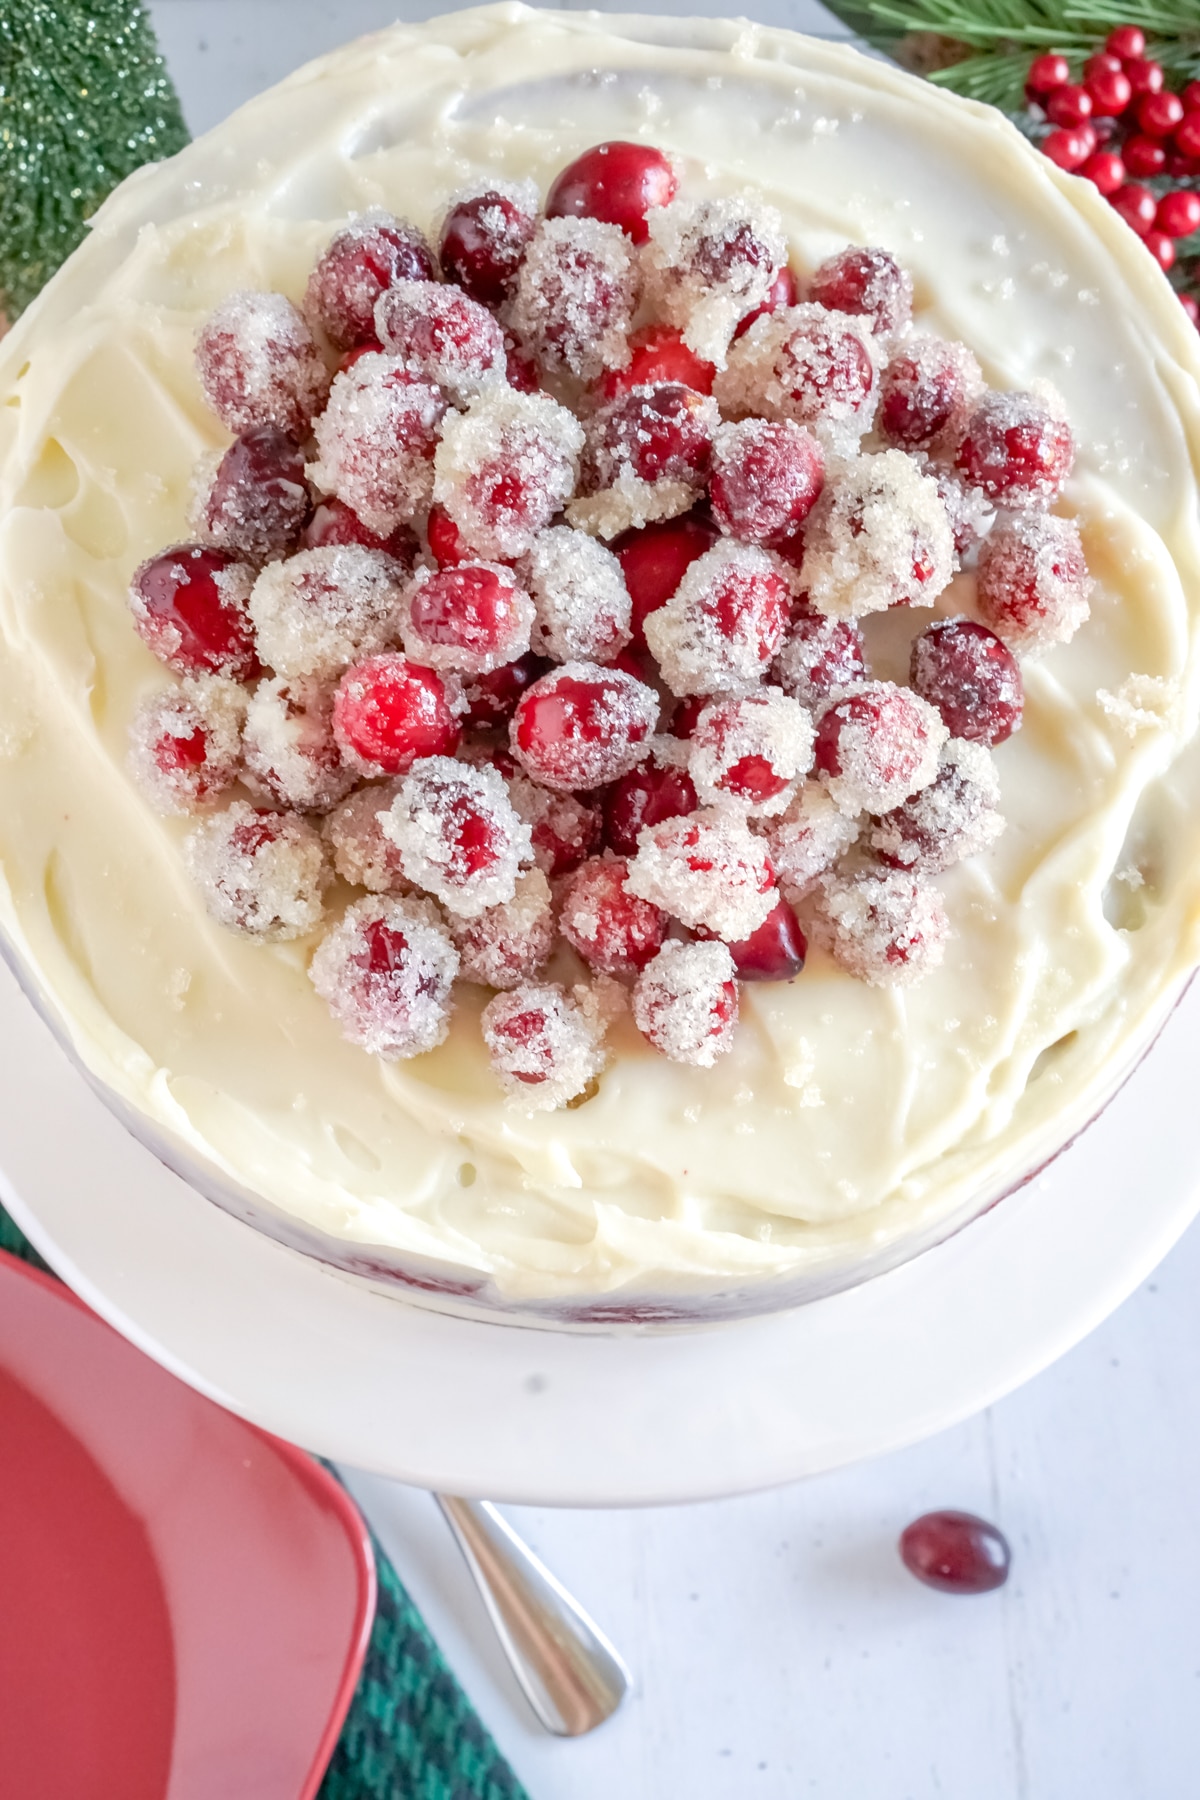 Cake with sugared cranberries on top